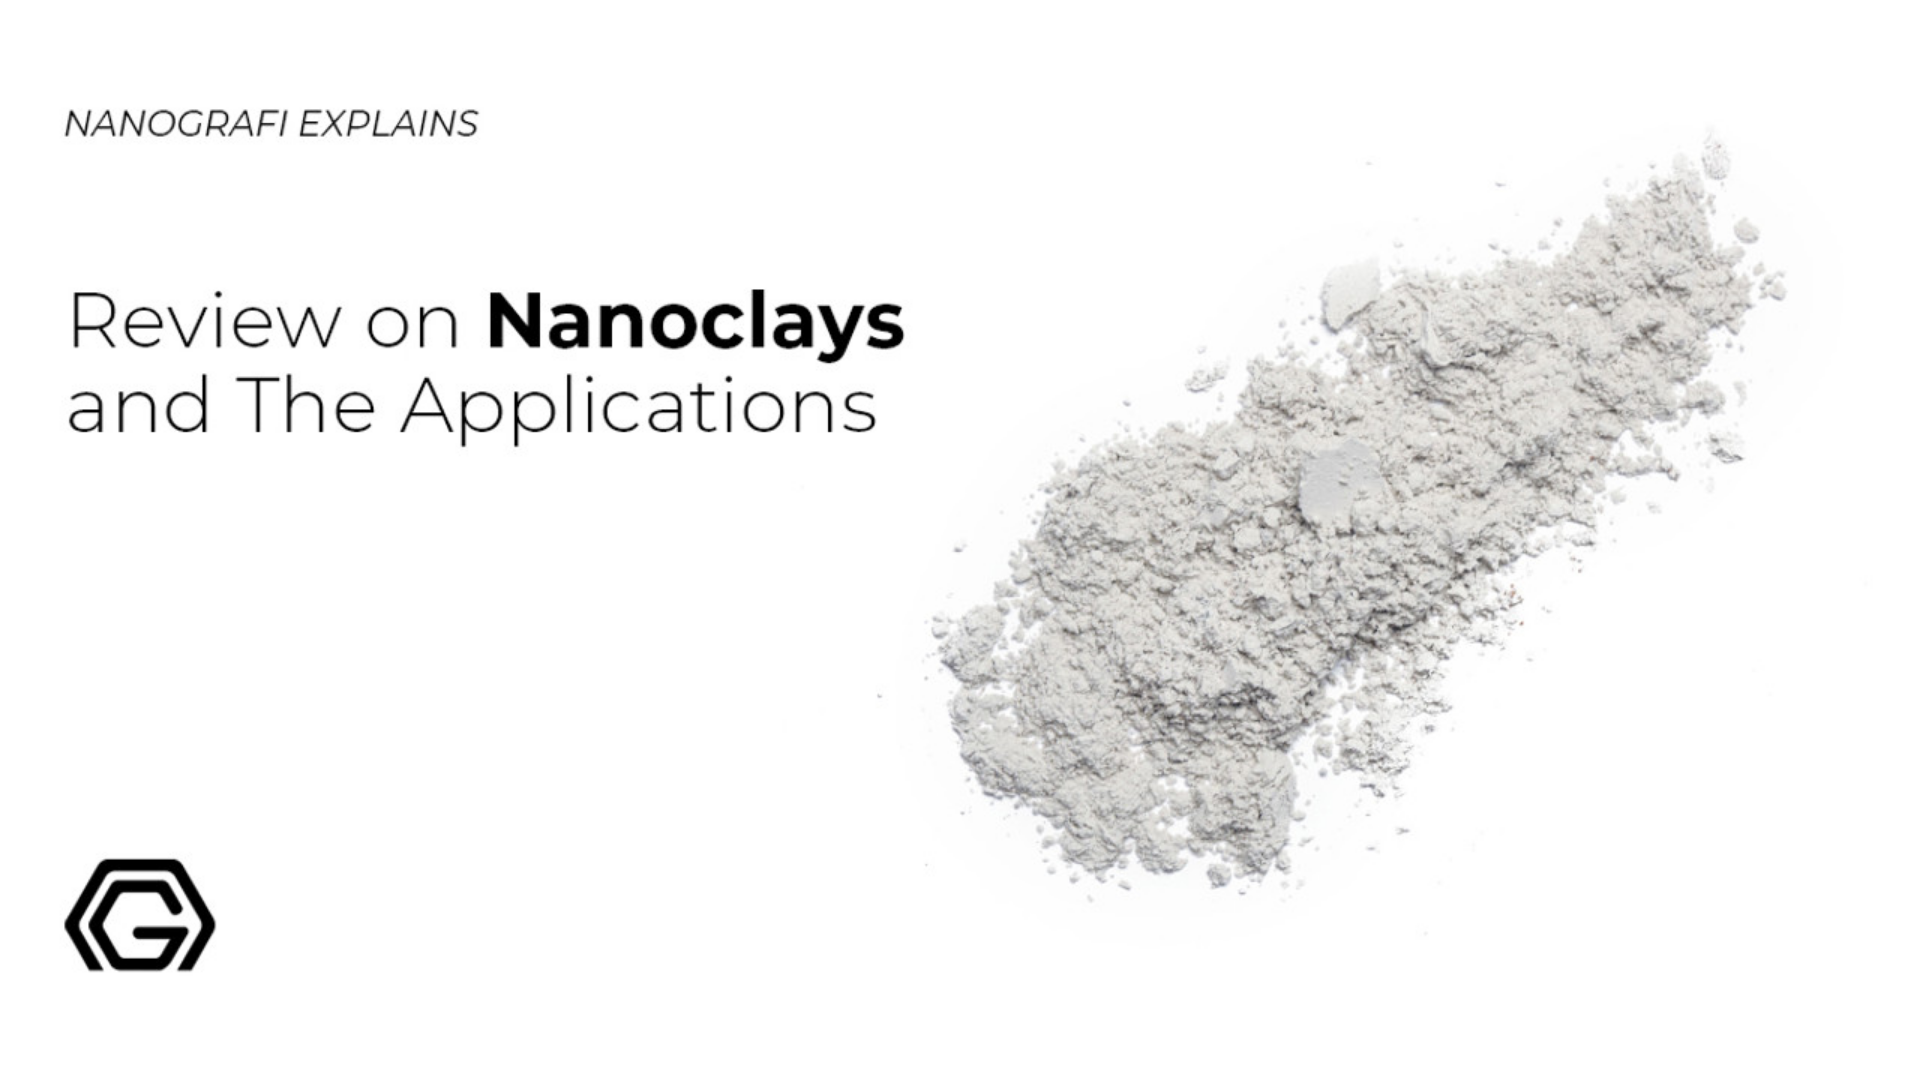  Review on nanoclays and the applications